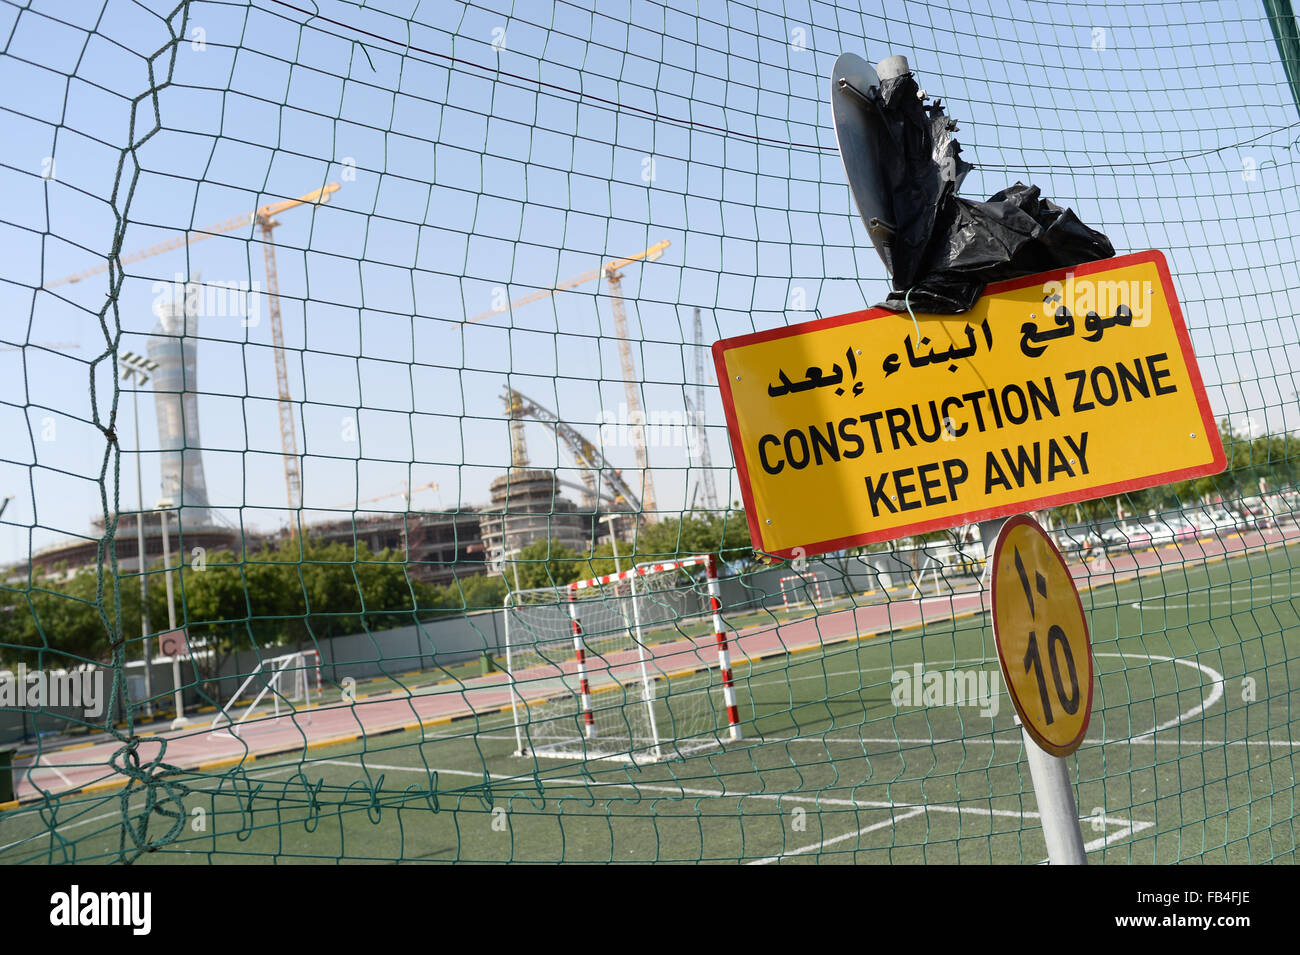 A sign reading 'Construction Zone - Keep Away' stands at an entrance to the construction site of the Khalifa International Stadium in Doha, 09 January 2016. The stadium is currently undergoing renovation works. The Khalifa International Stadium is the first proposed host venue for the 2022 FIFA World Cup Qatar. In background at left is the hotel 'The Torch'. Photo: Andreas Gebert/dpa Stock Photo